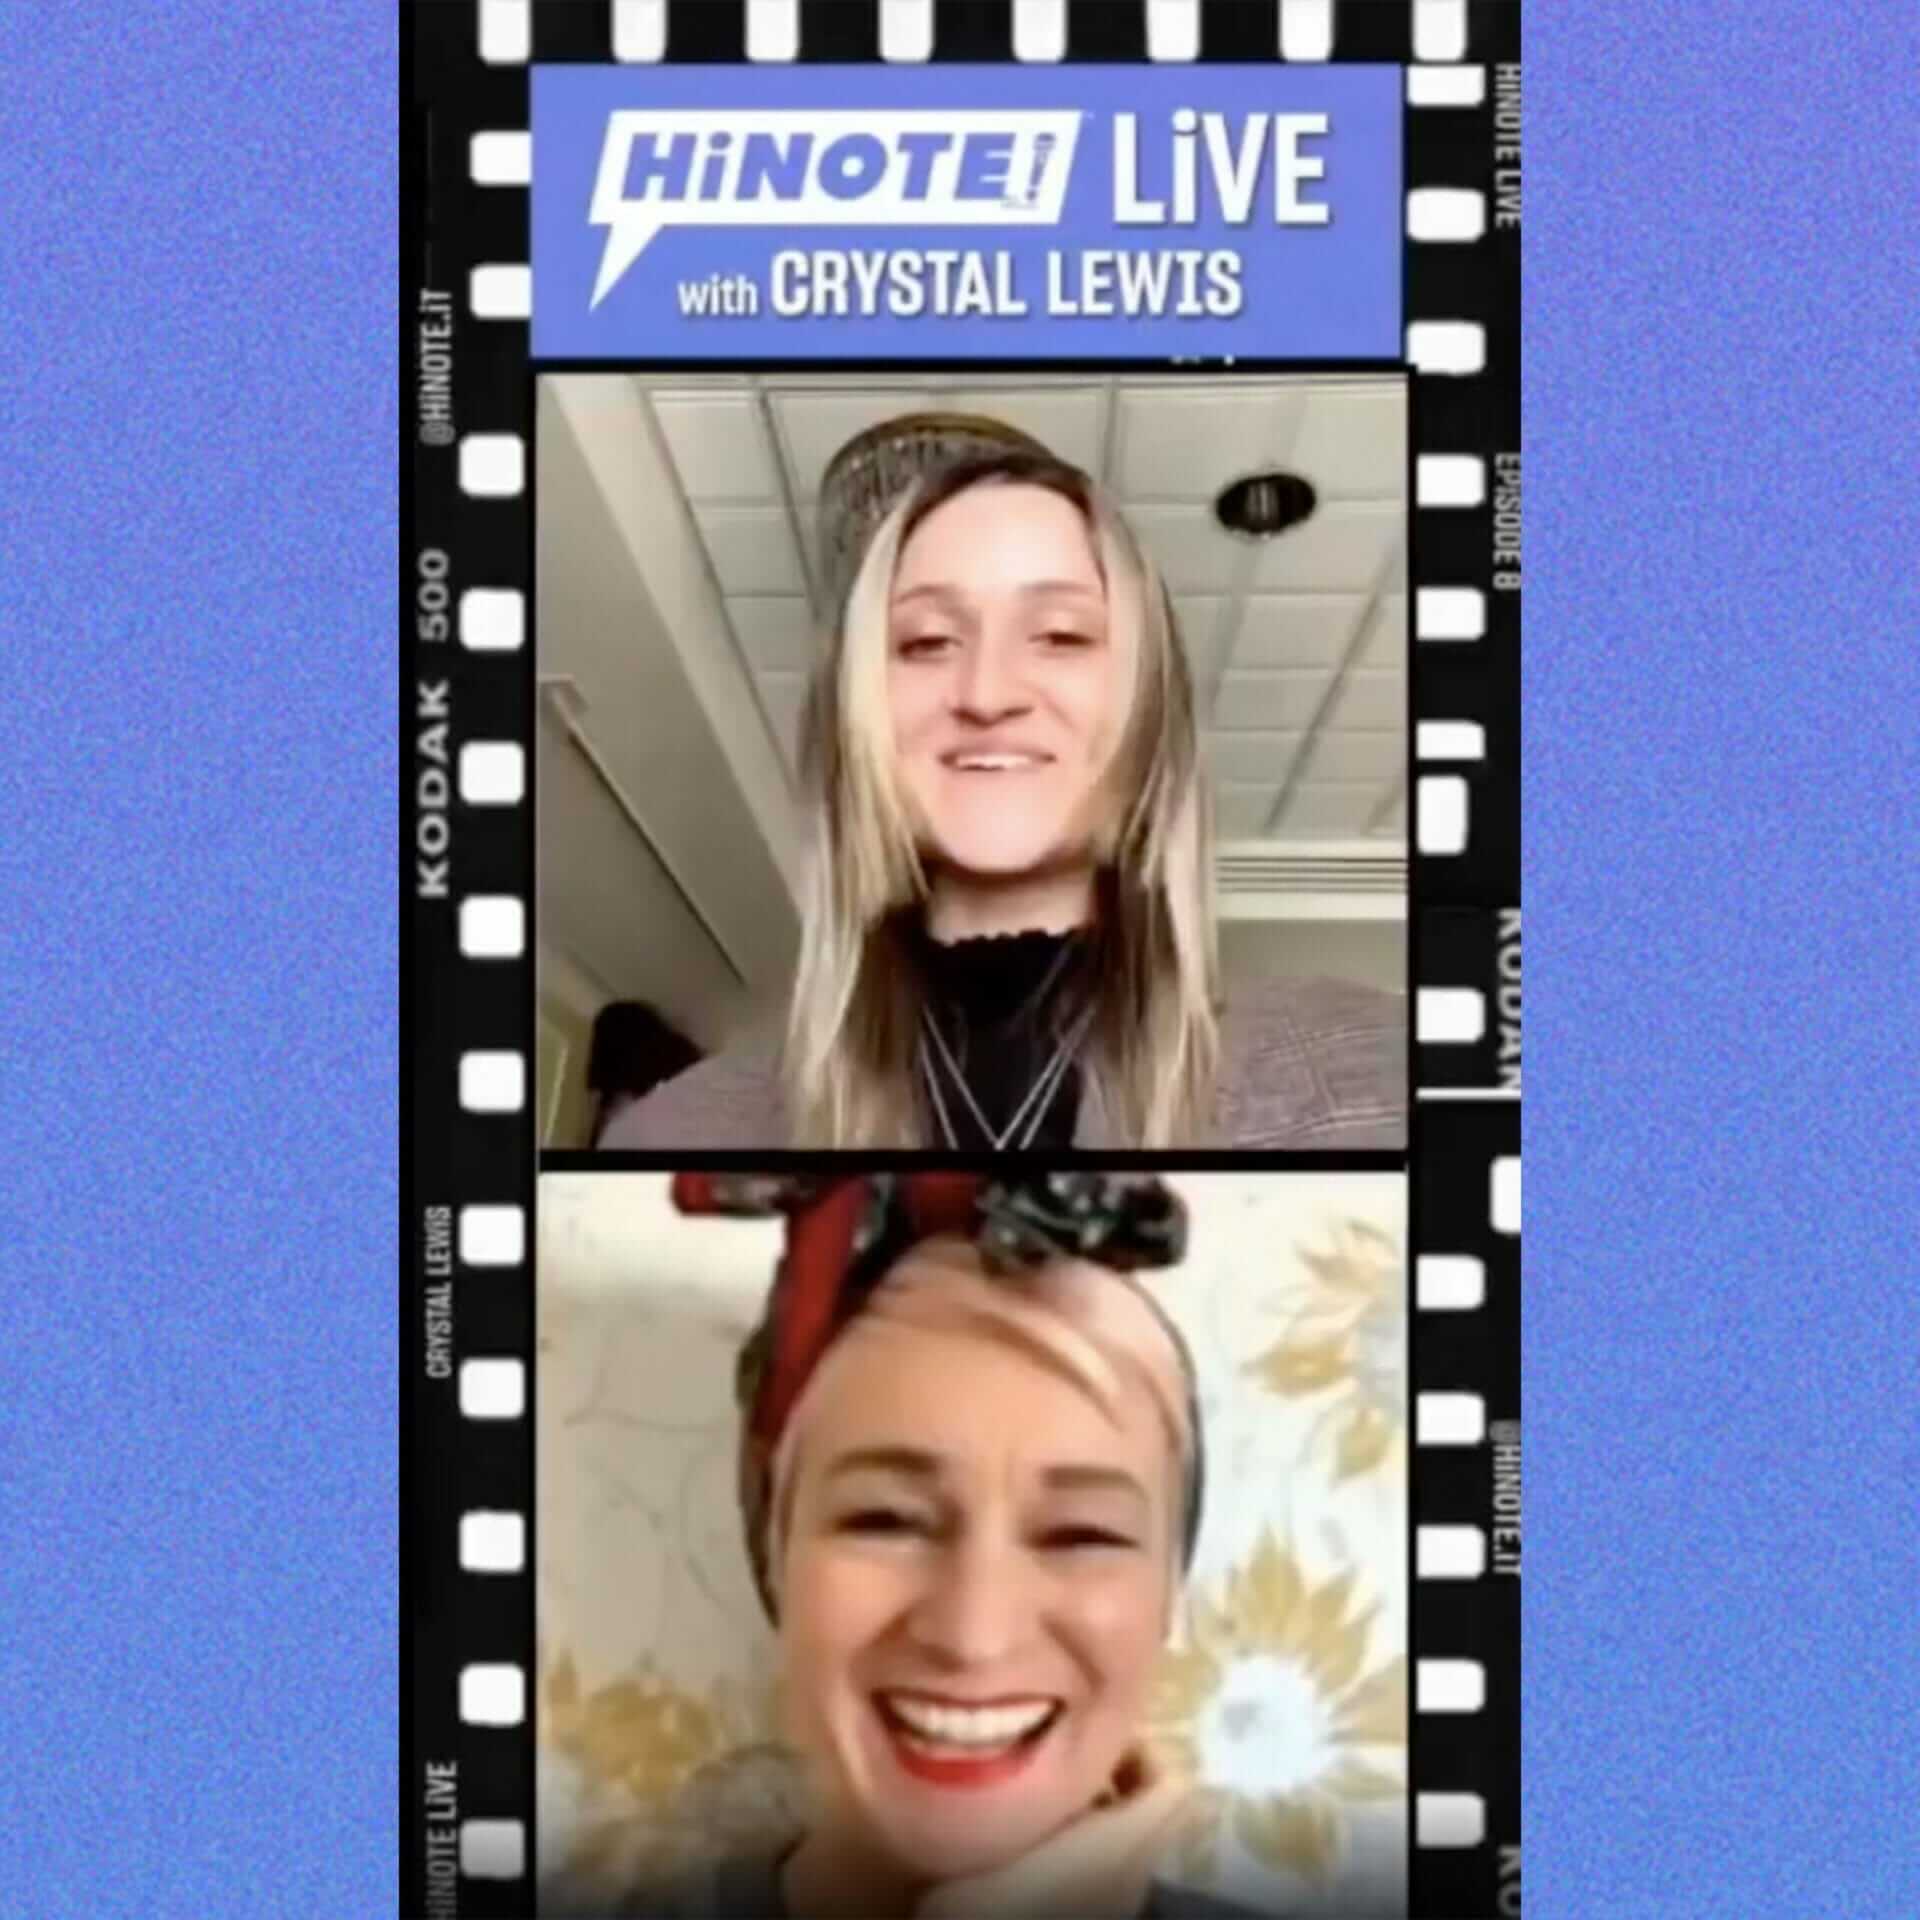 HiNOTE LiVE #9 with Crystal Lewis